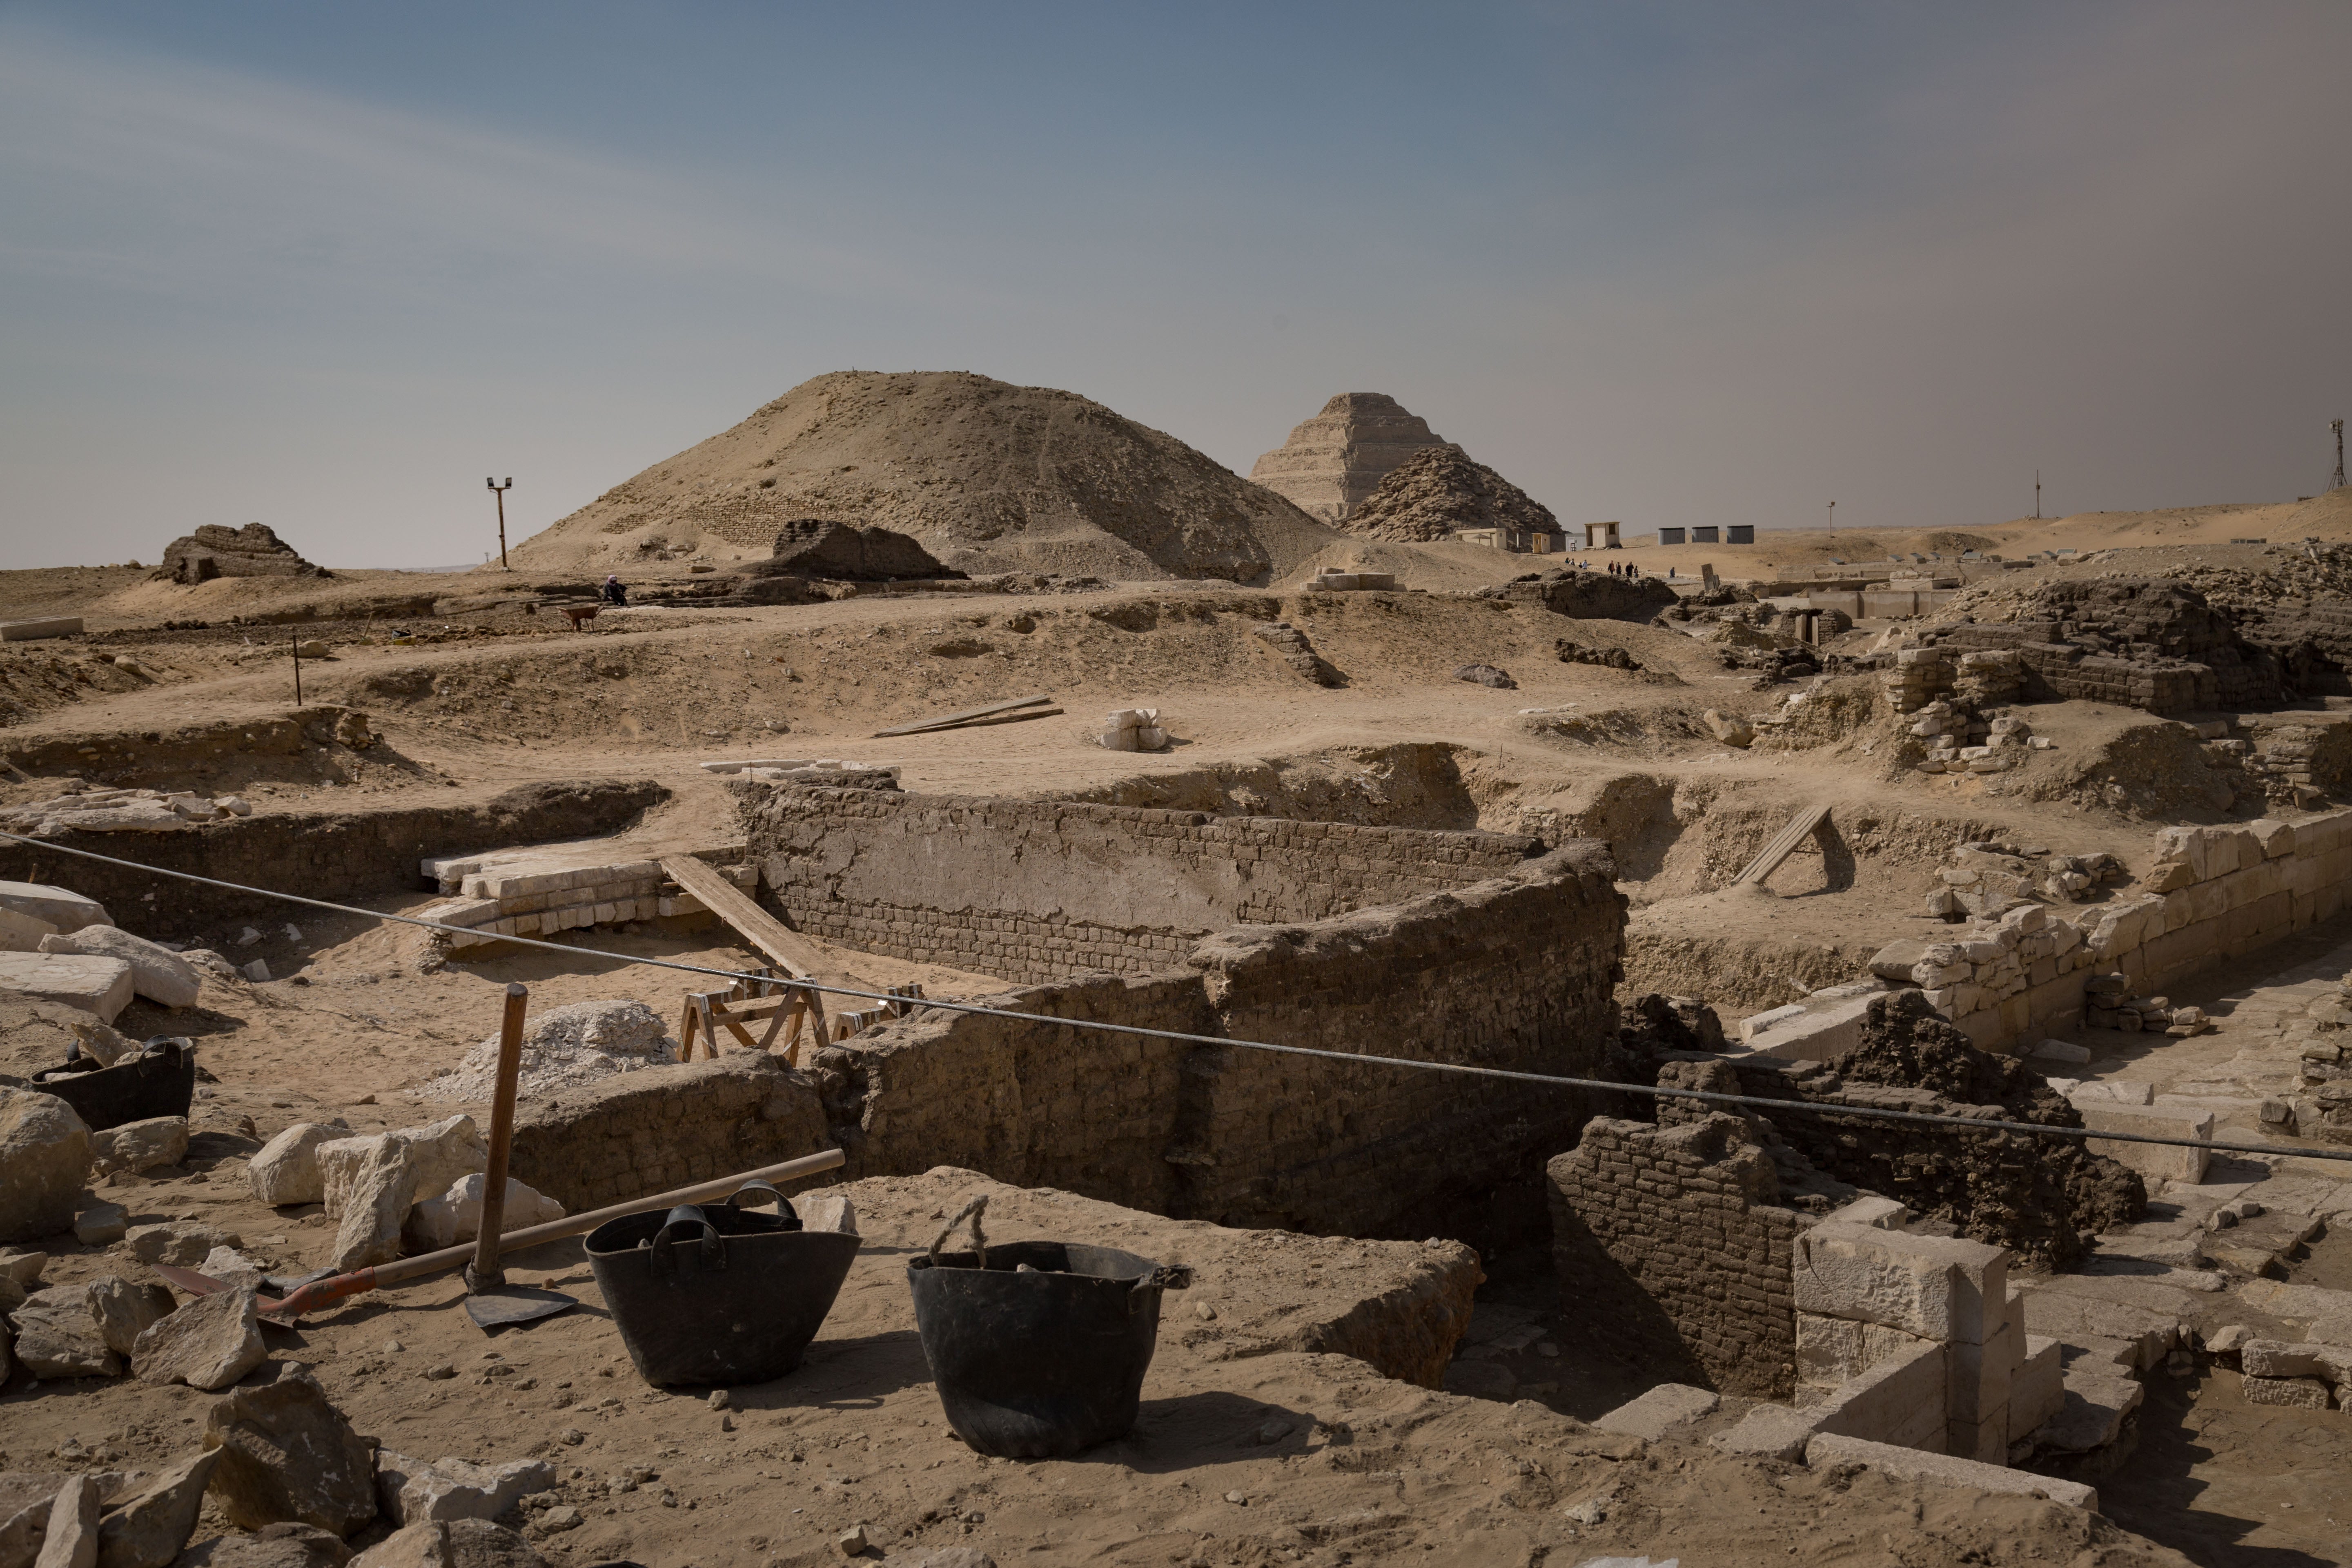 Archaeologist Zahi Hawass’s dig site at Saqqara where the discovery of a queen has reshaped the understanding of ancient Egyptians